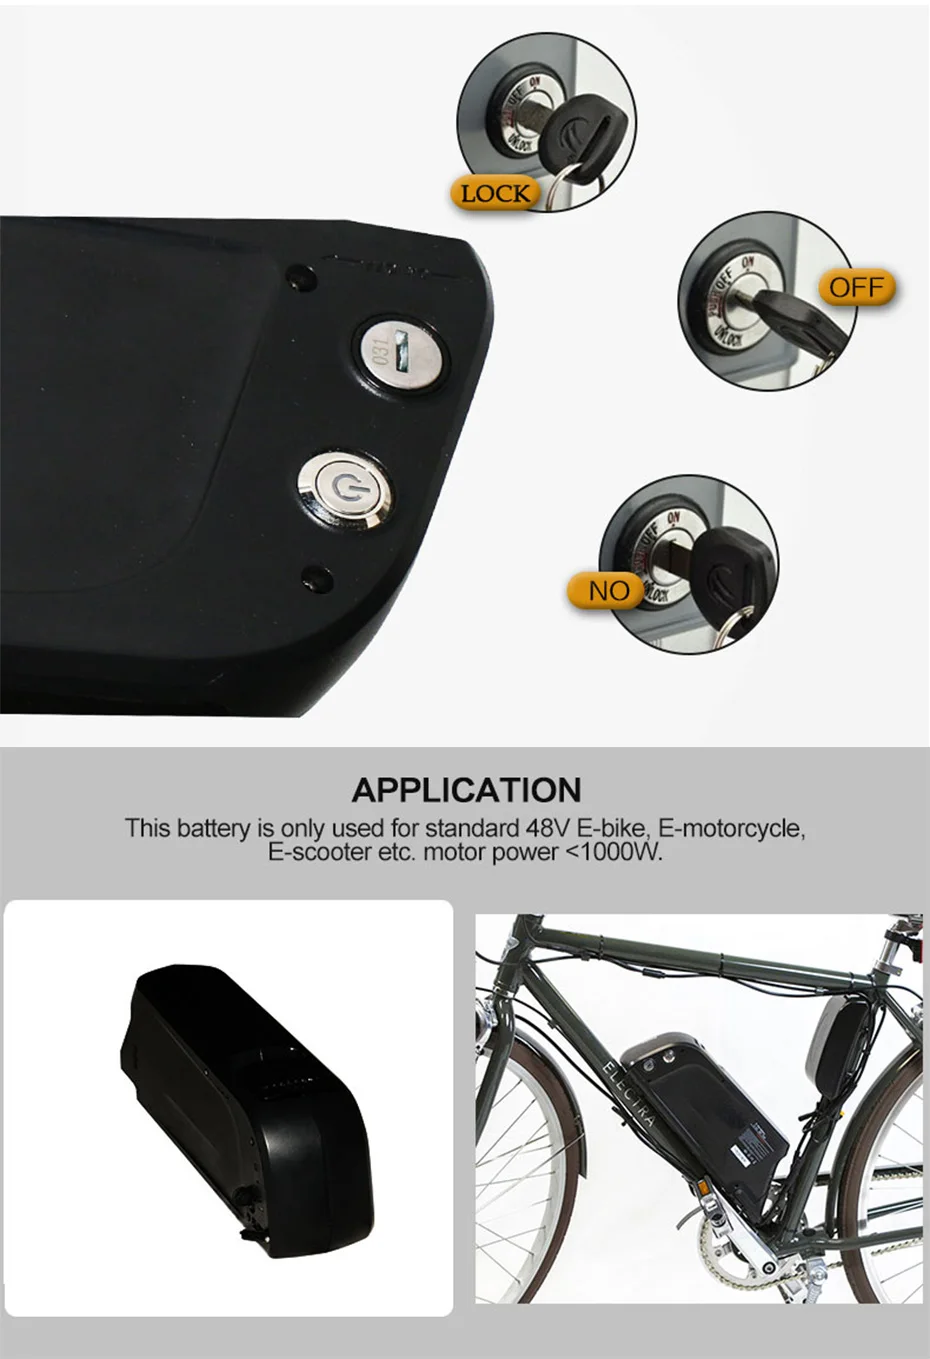 Top 48V Electric Bike Battery High Capacity Samsung Battery with Charger Ebike Electric Conversion Kit Part Acessories Free Shipping 6